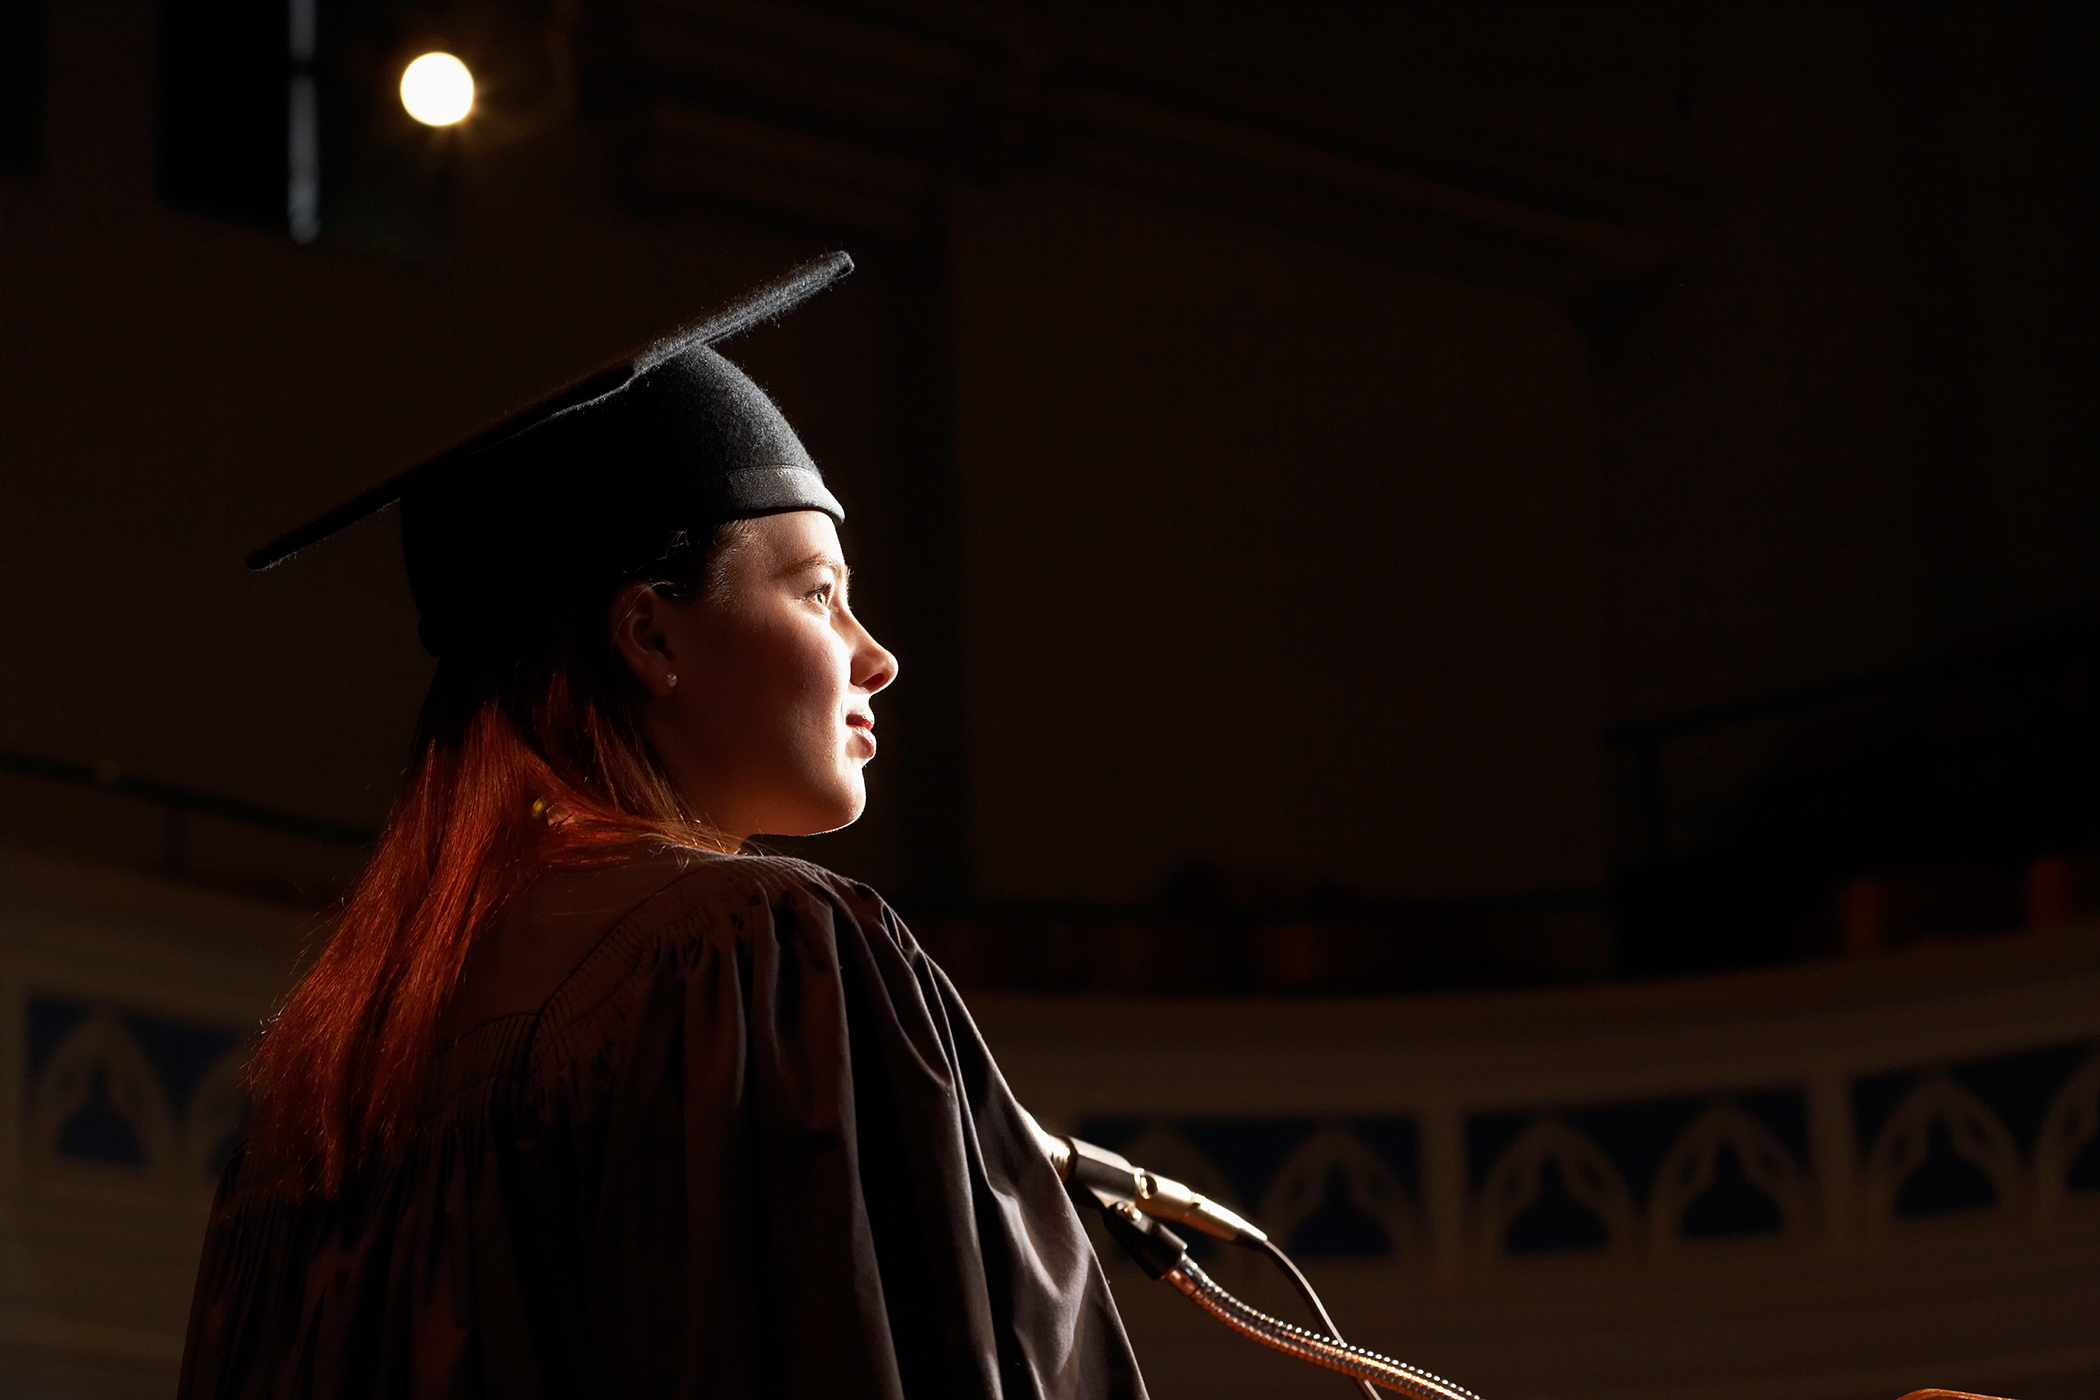 Wondering What Happened to Your Class Valedictorian? Not Much, Research Shows